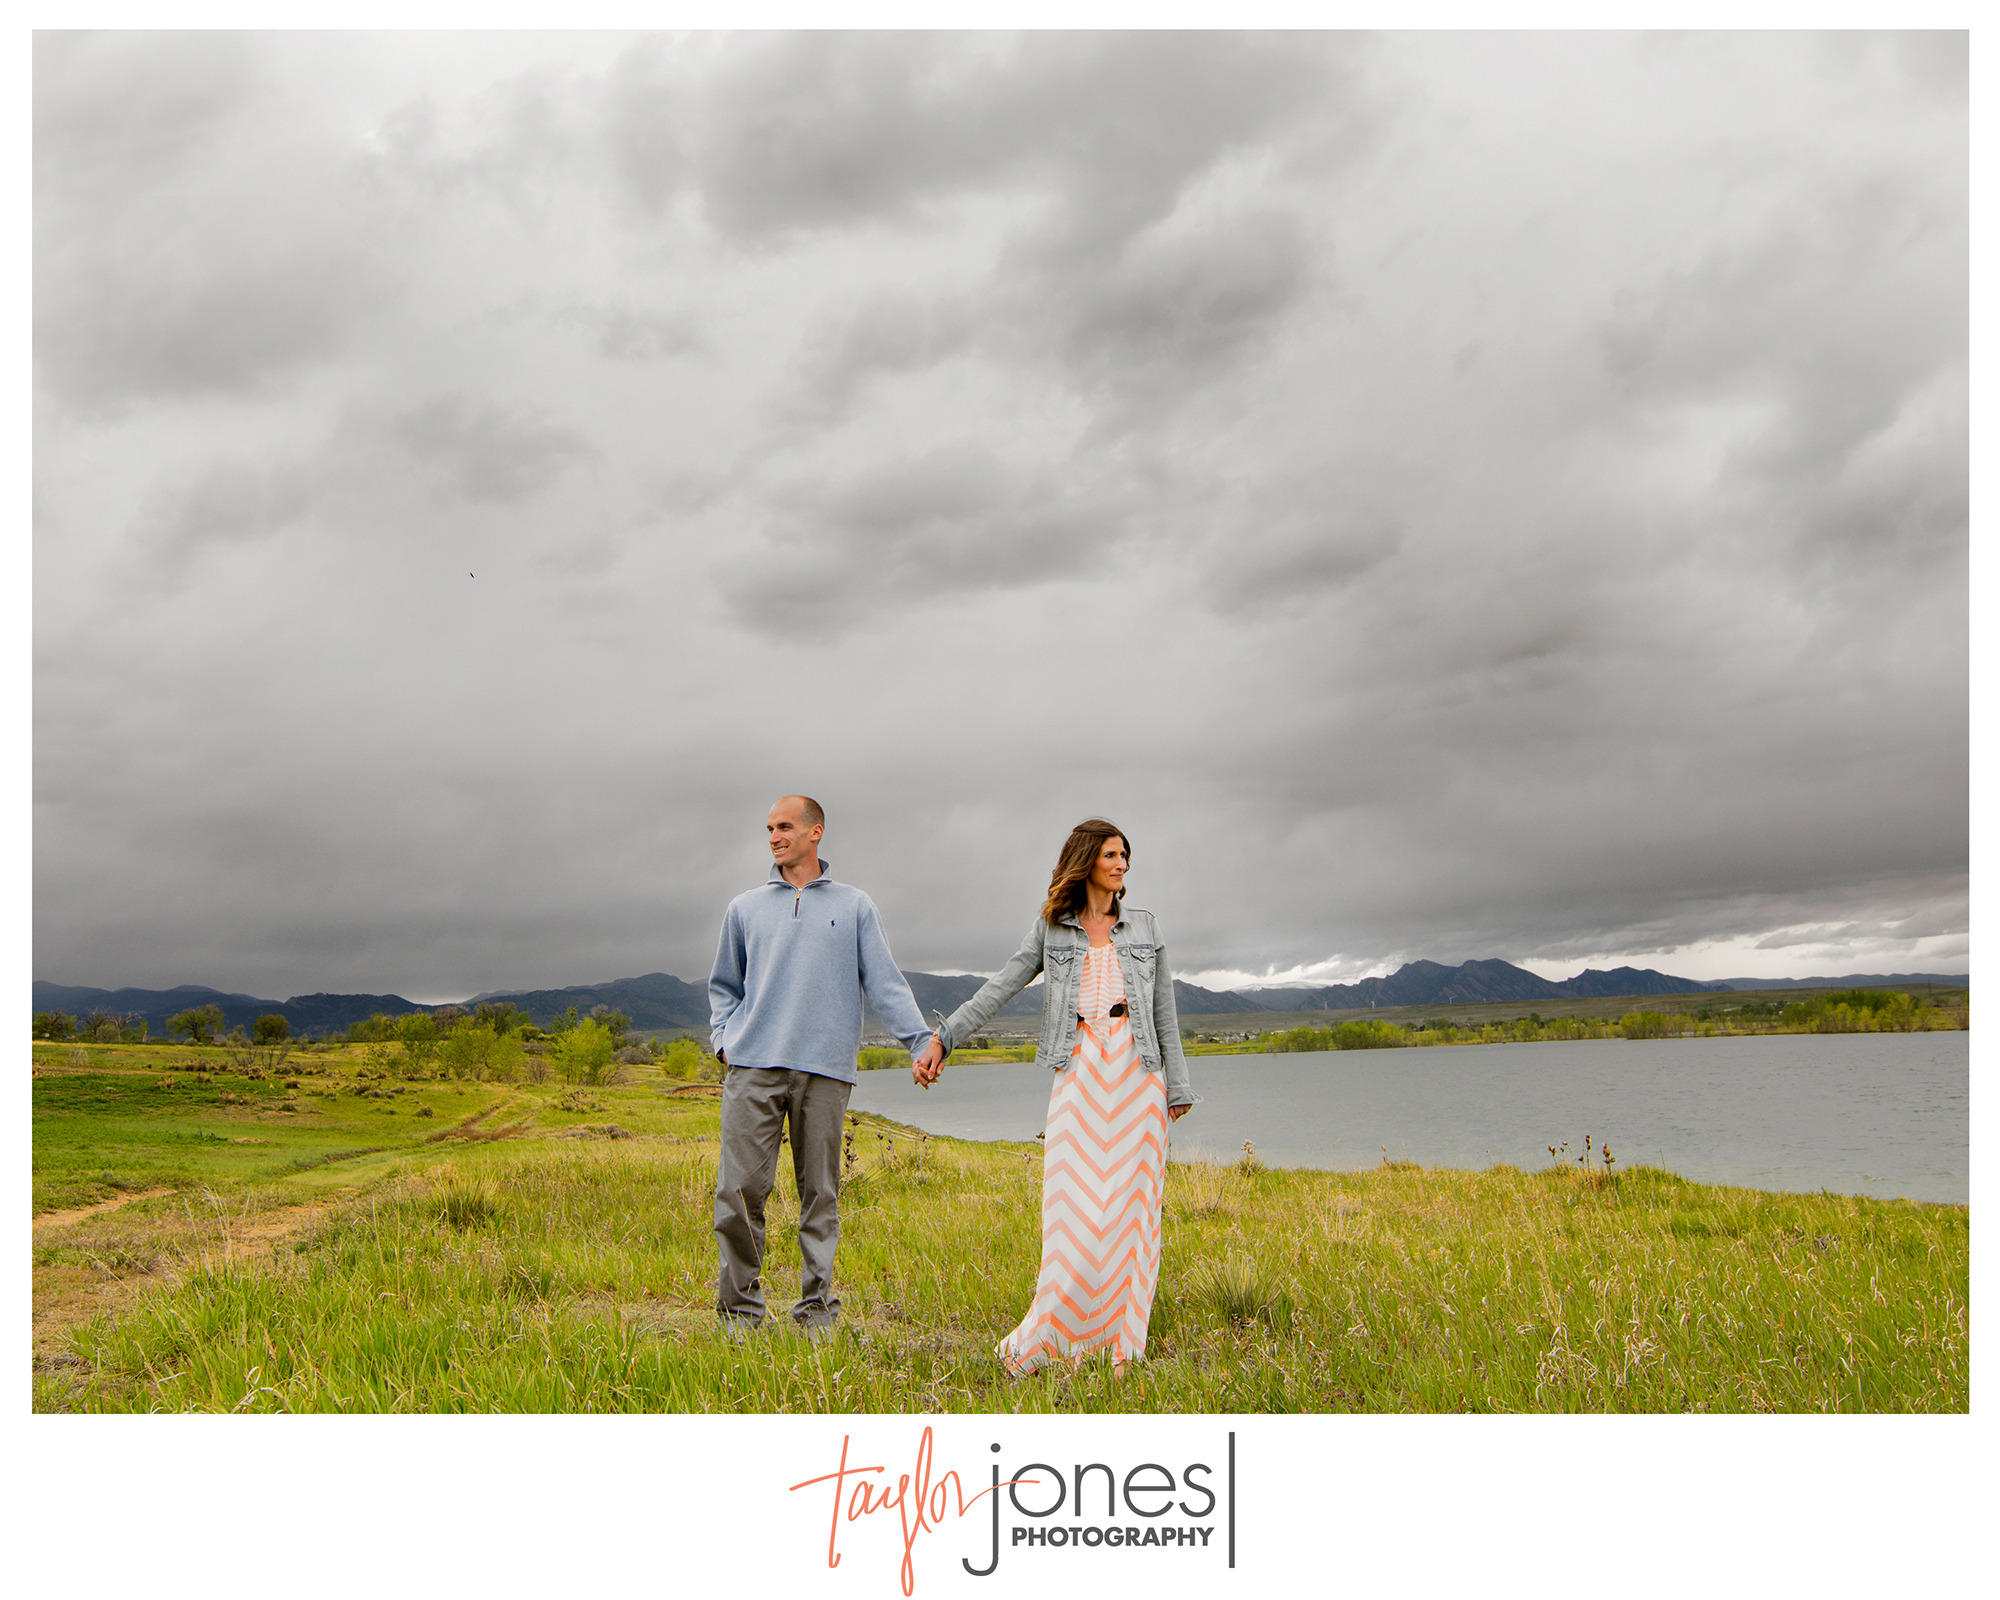 Standley lake engagement shoot during a storm